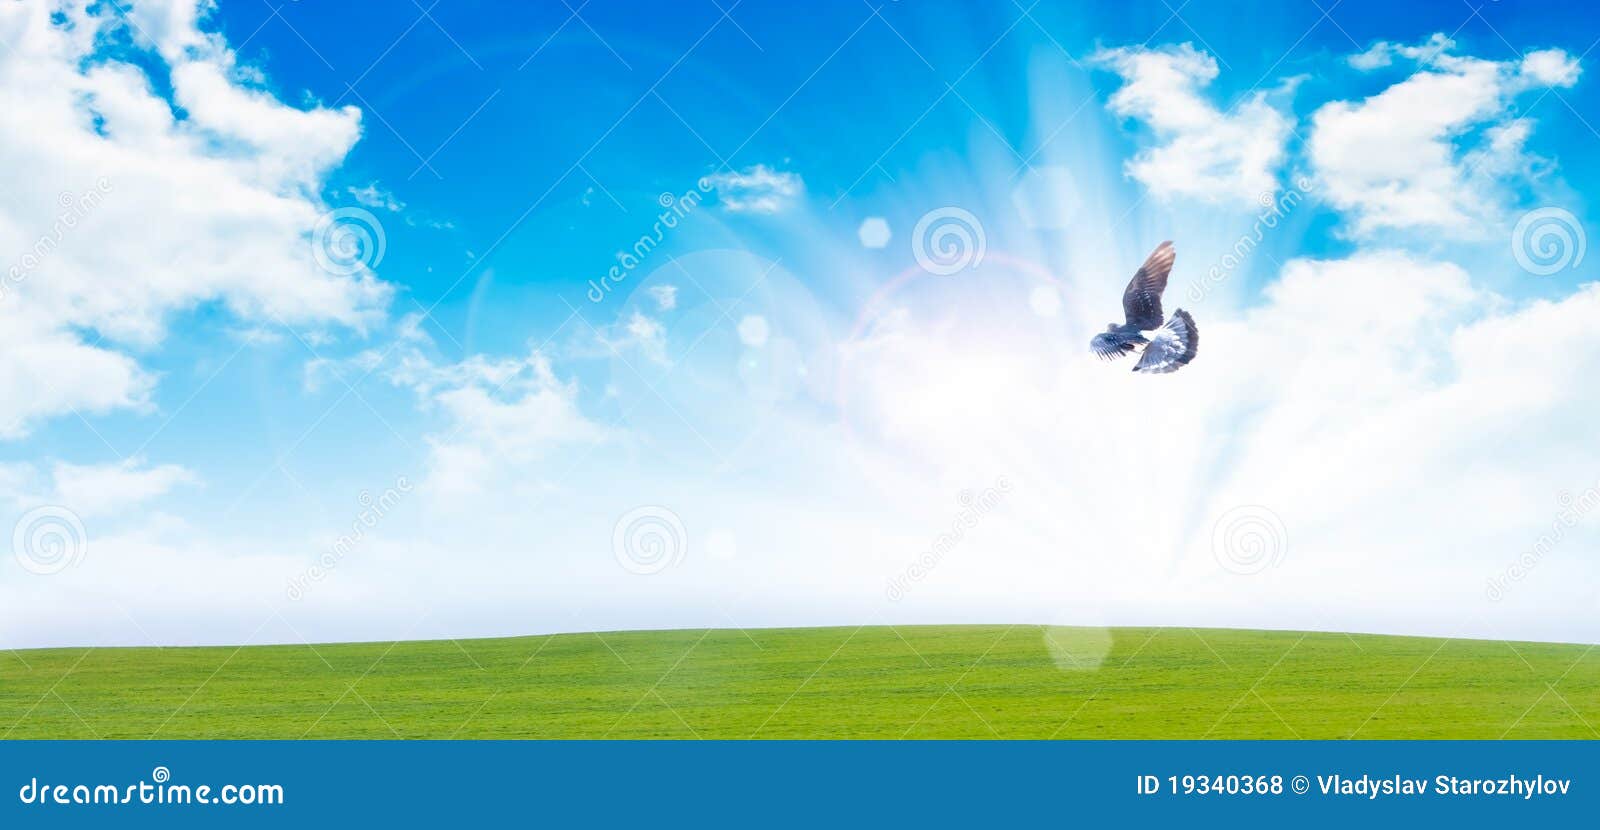 Flying dove over a field of grass